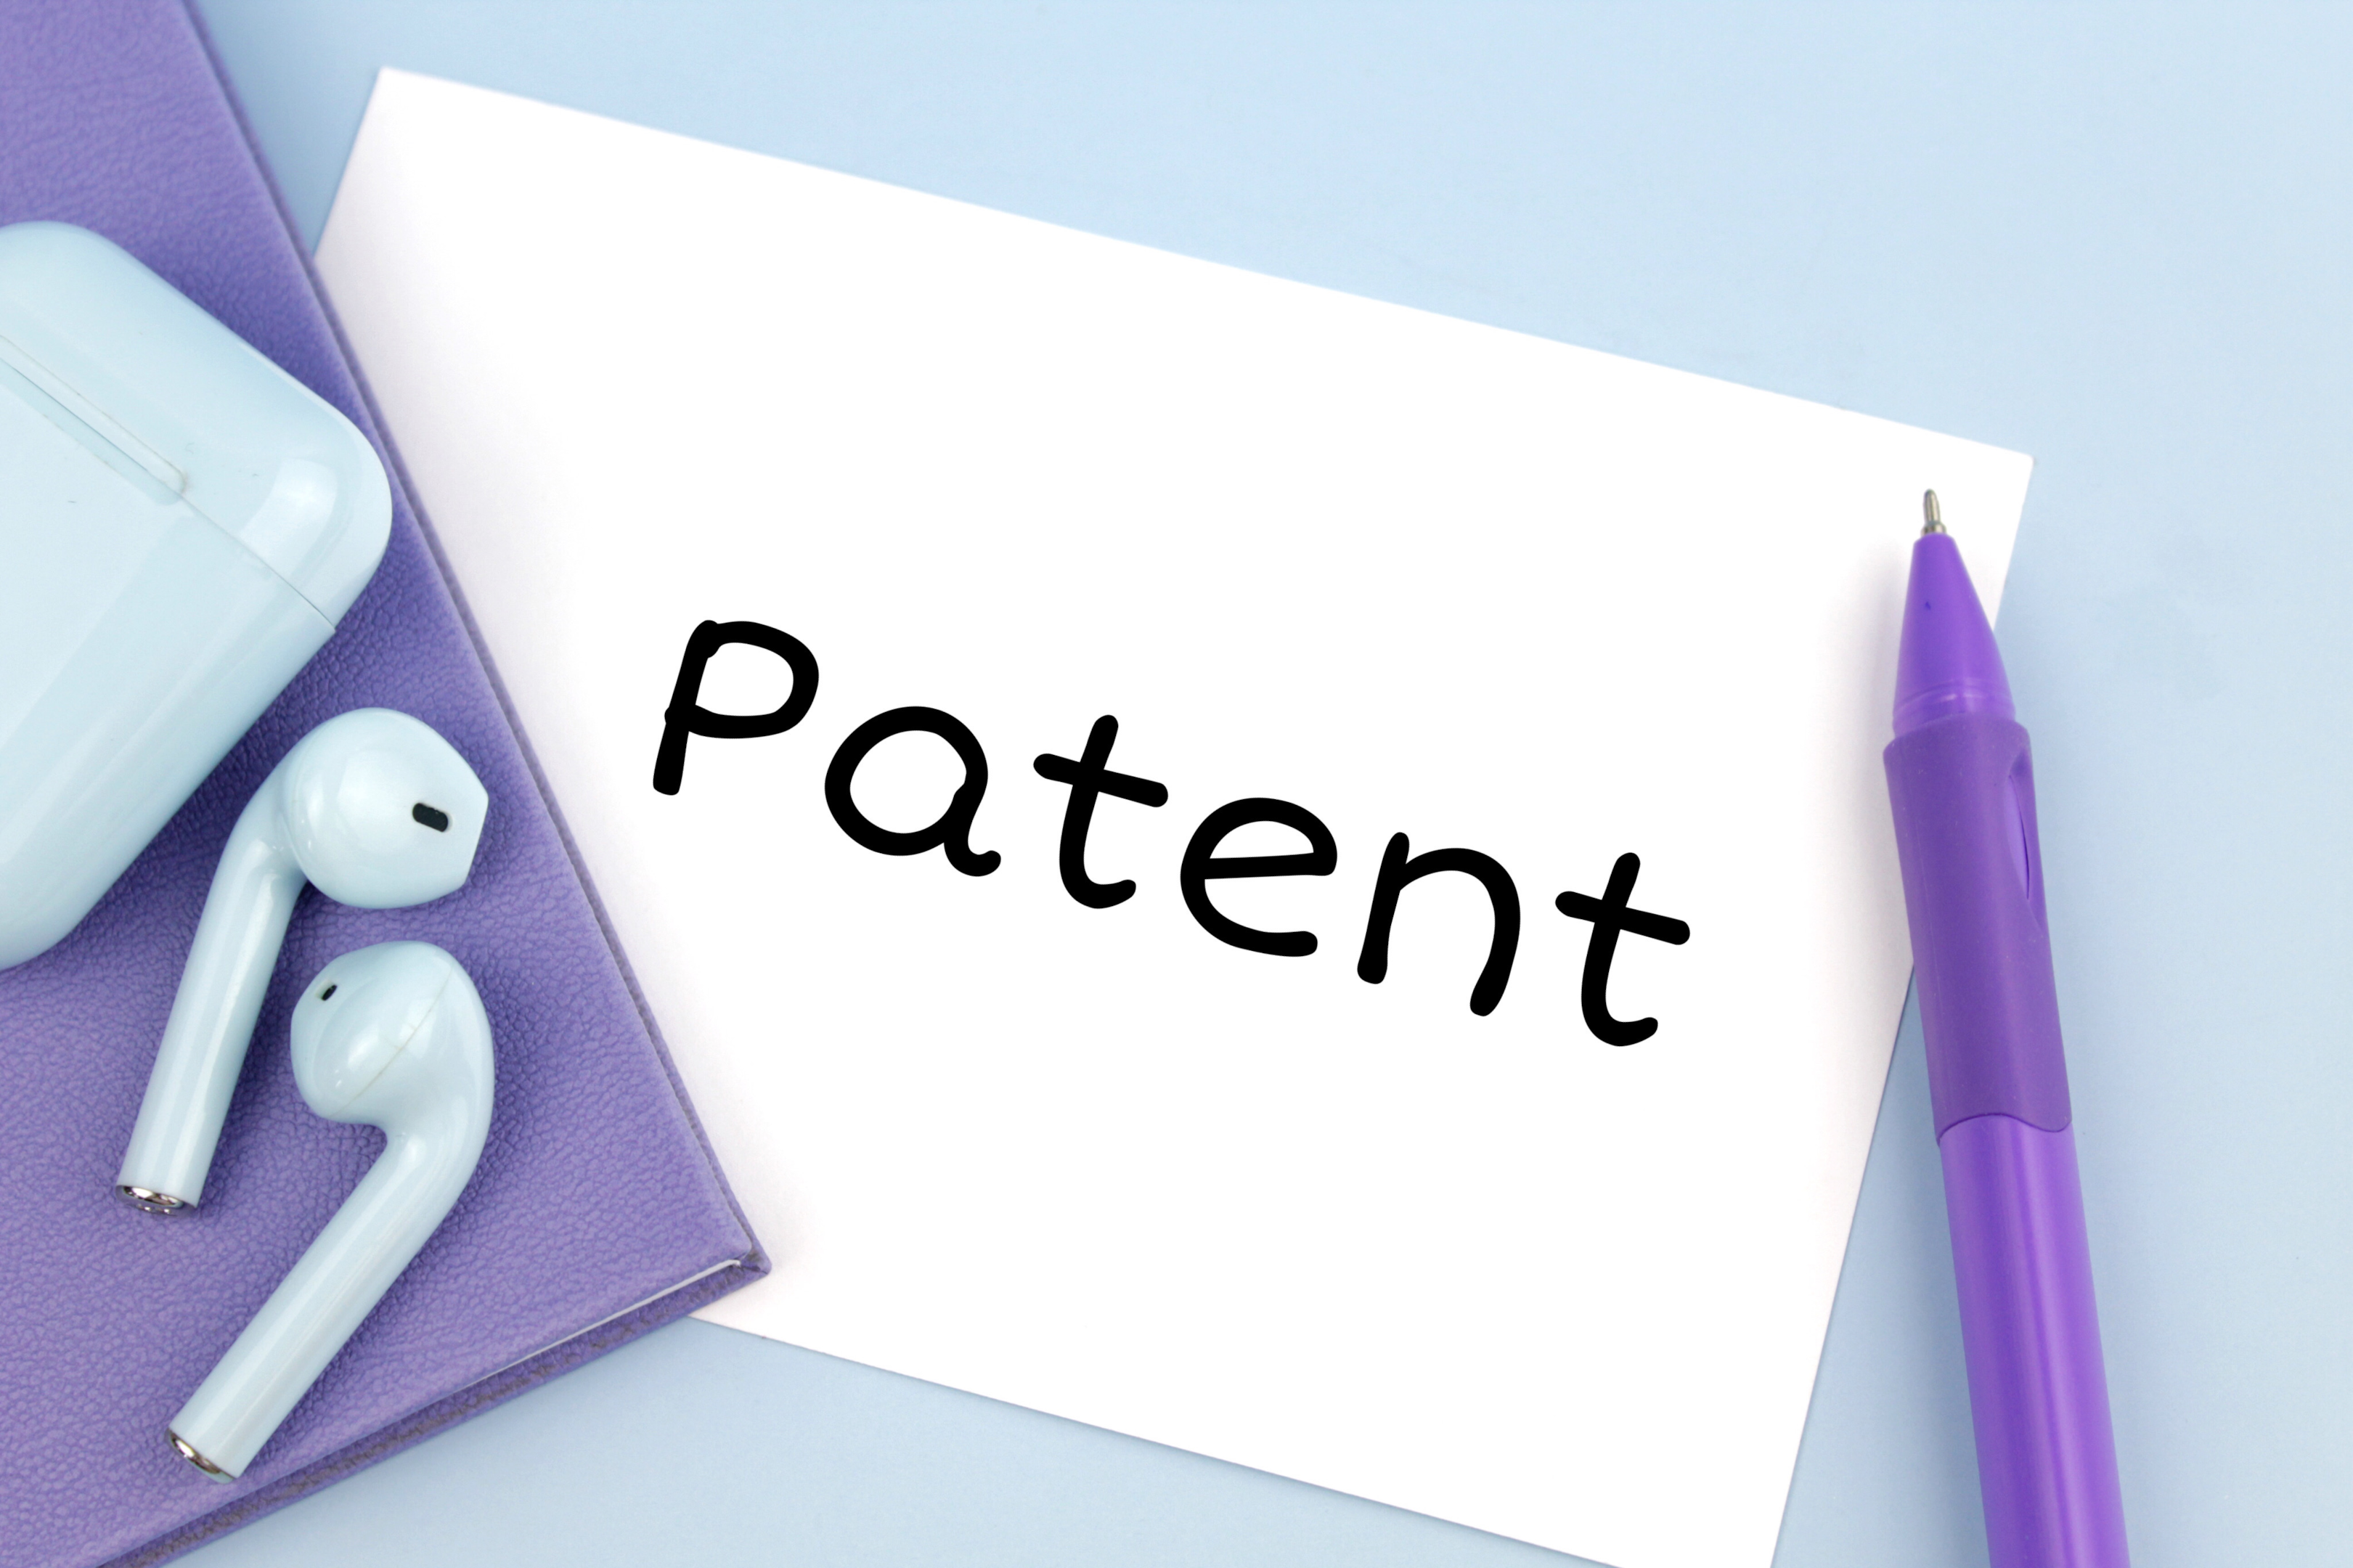 Discover the significance of patent pending status. By filing a provisional patent application, you provide actual notice to potential infringers while mitigating legal risks. Safeguard your innovation with the power of patent pending